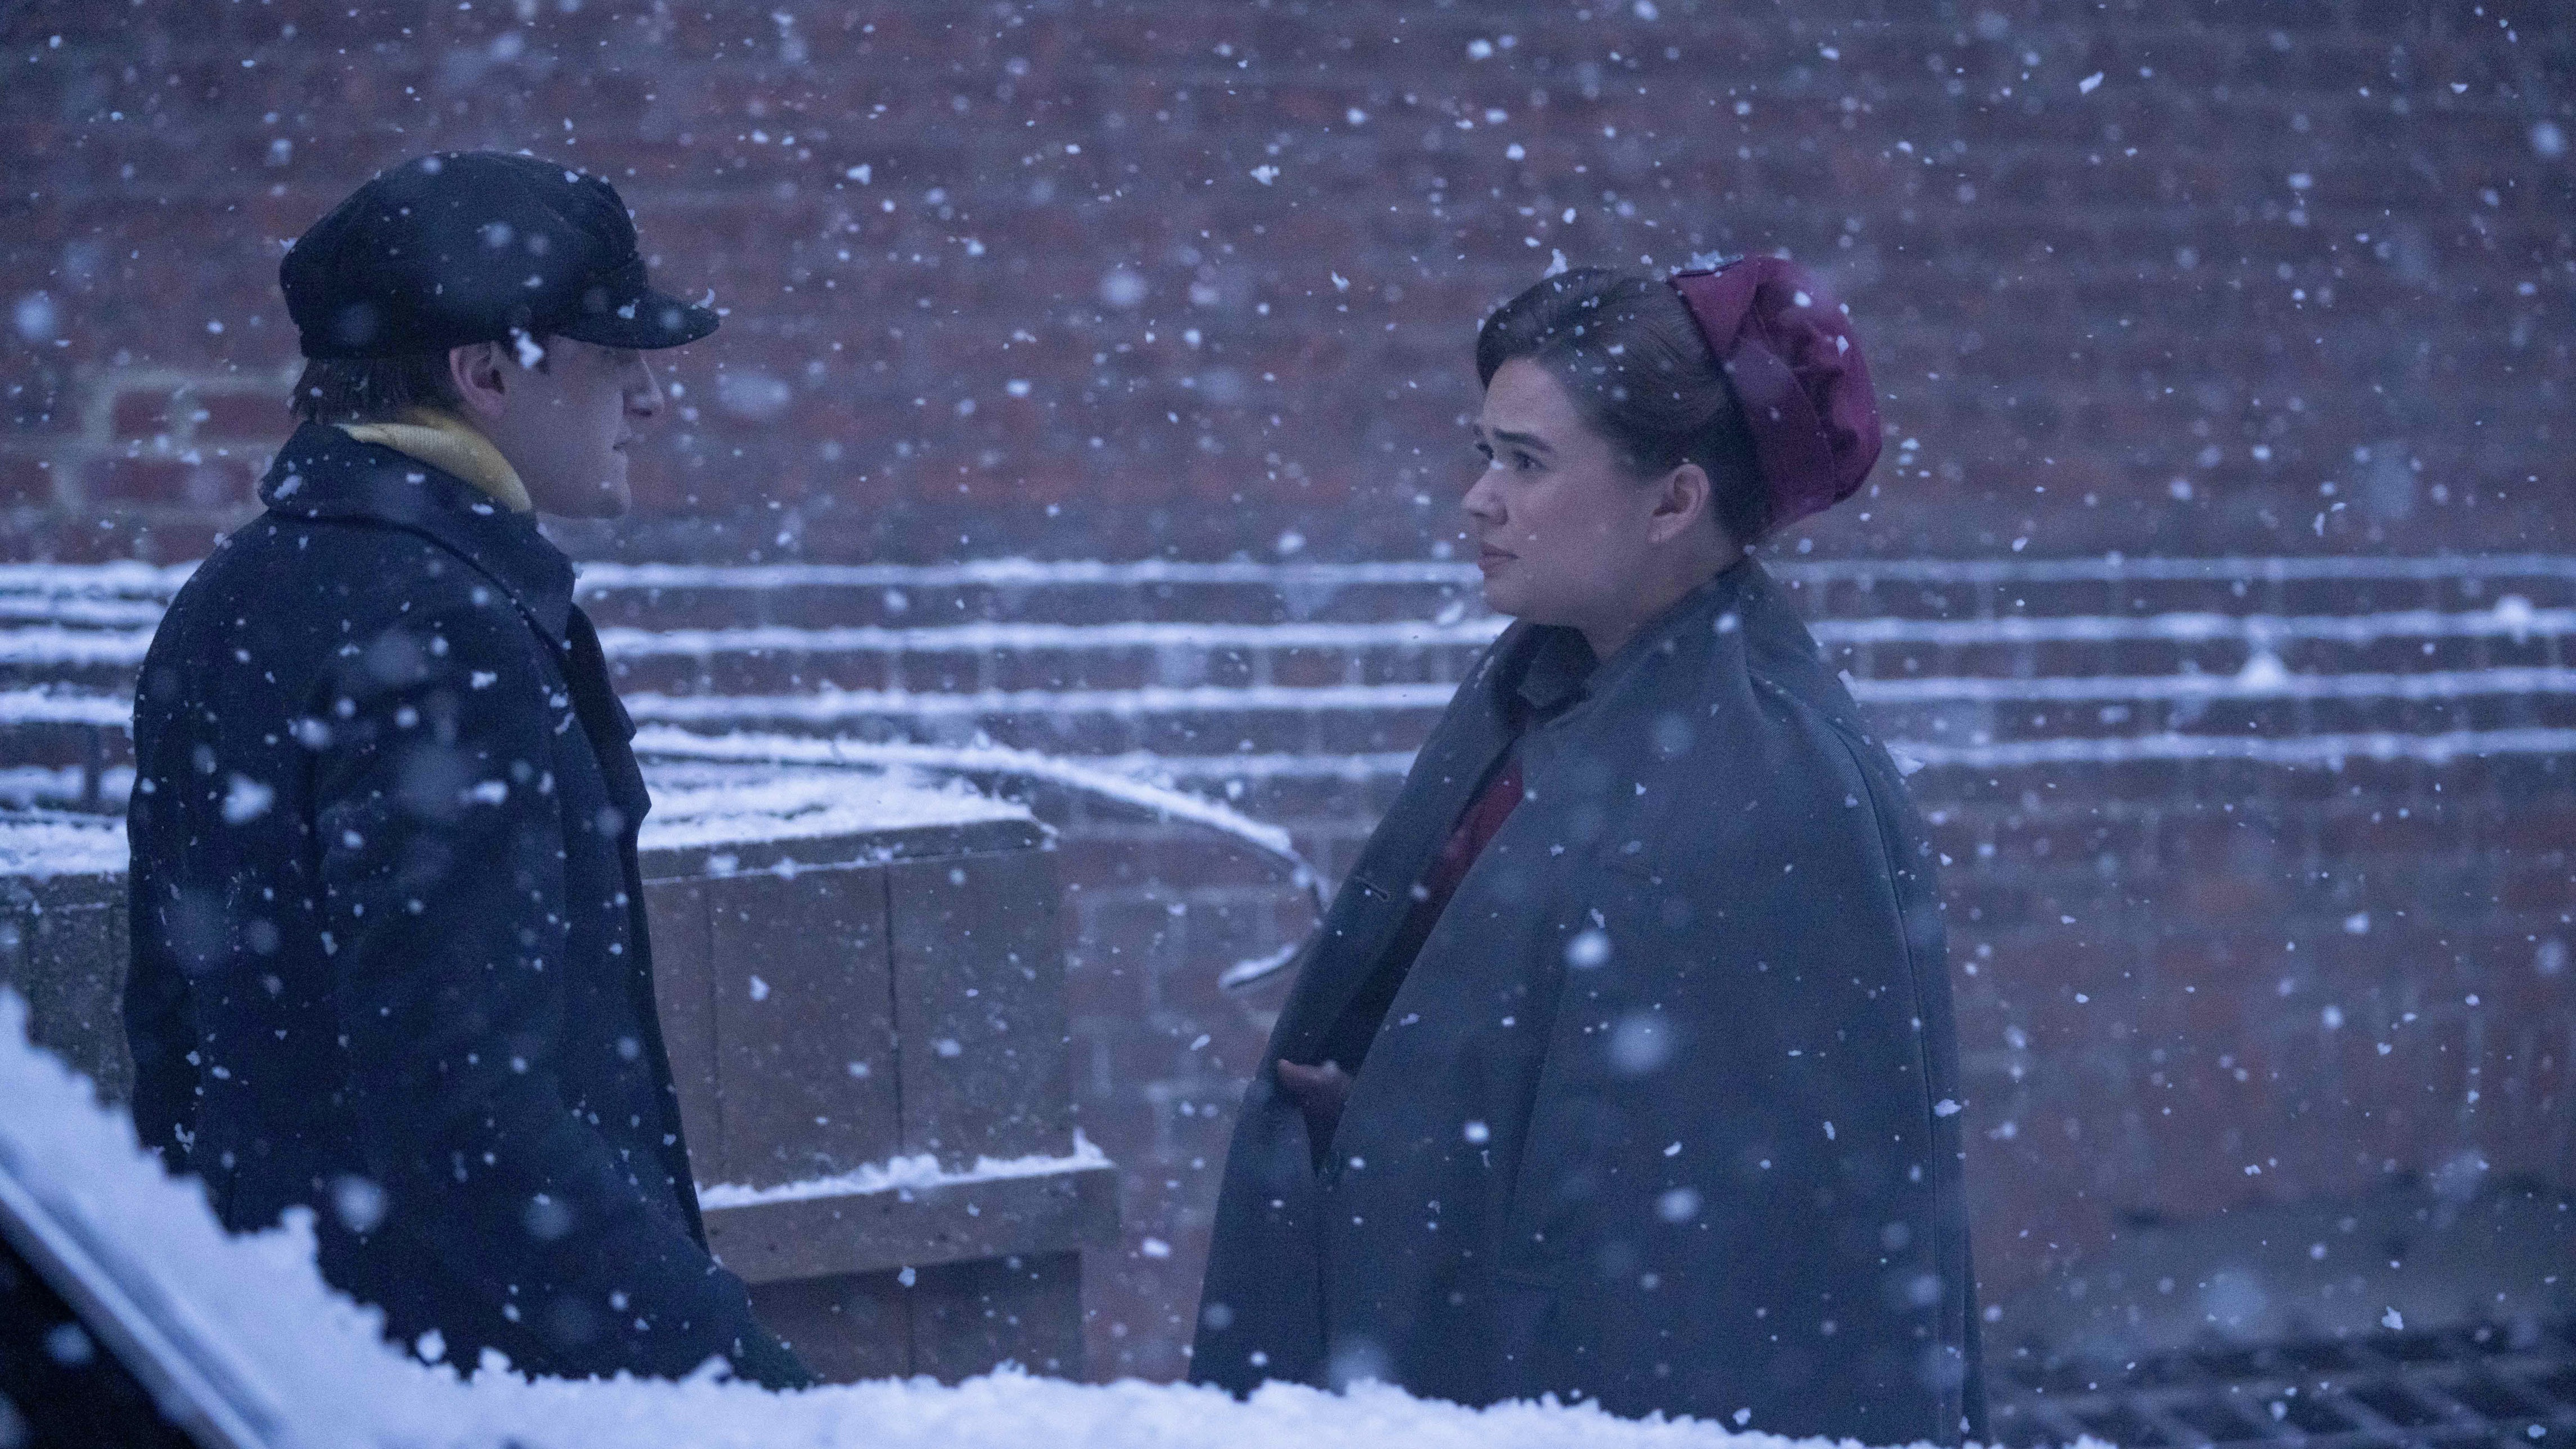 Max Macmillan in a hat and coat as Timothy and Megan Cusack in a nurse's uniform as Nancy stand in the snow in Call the Midwife.